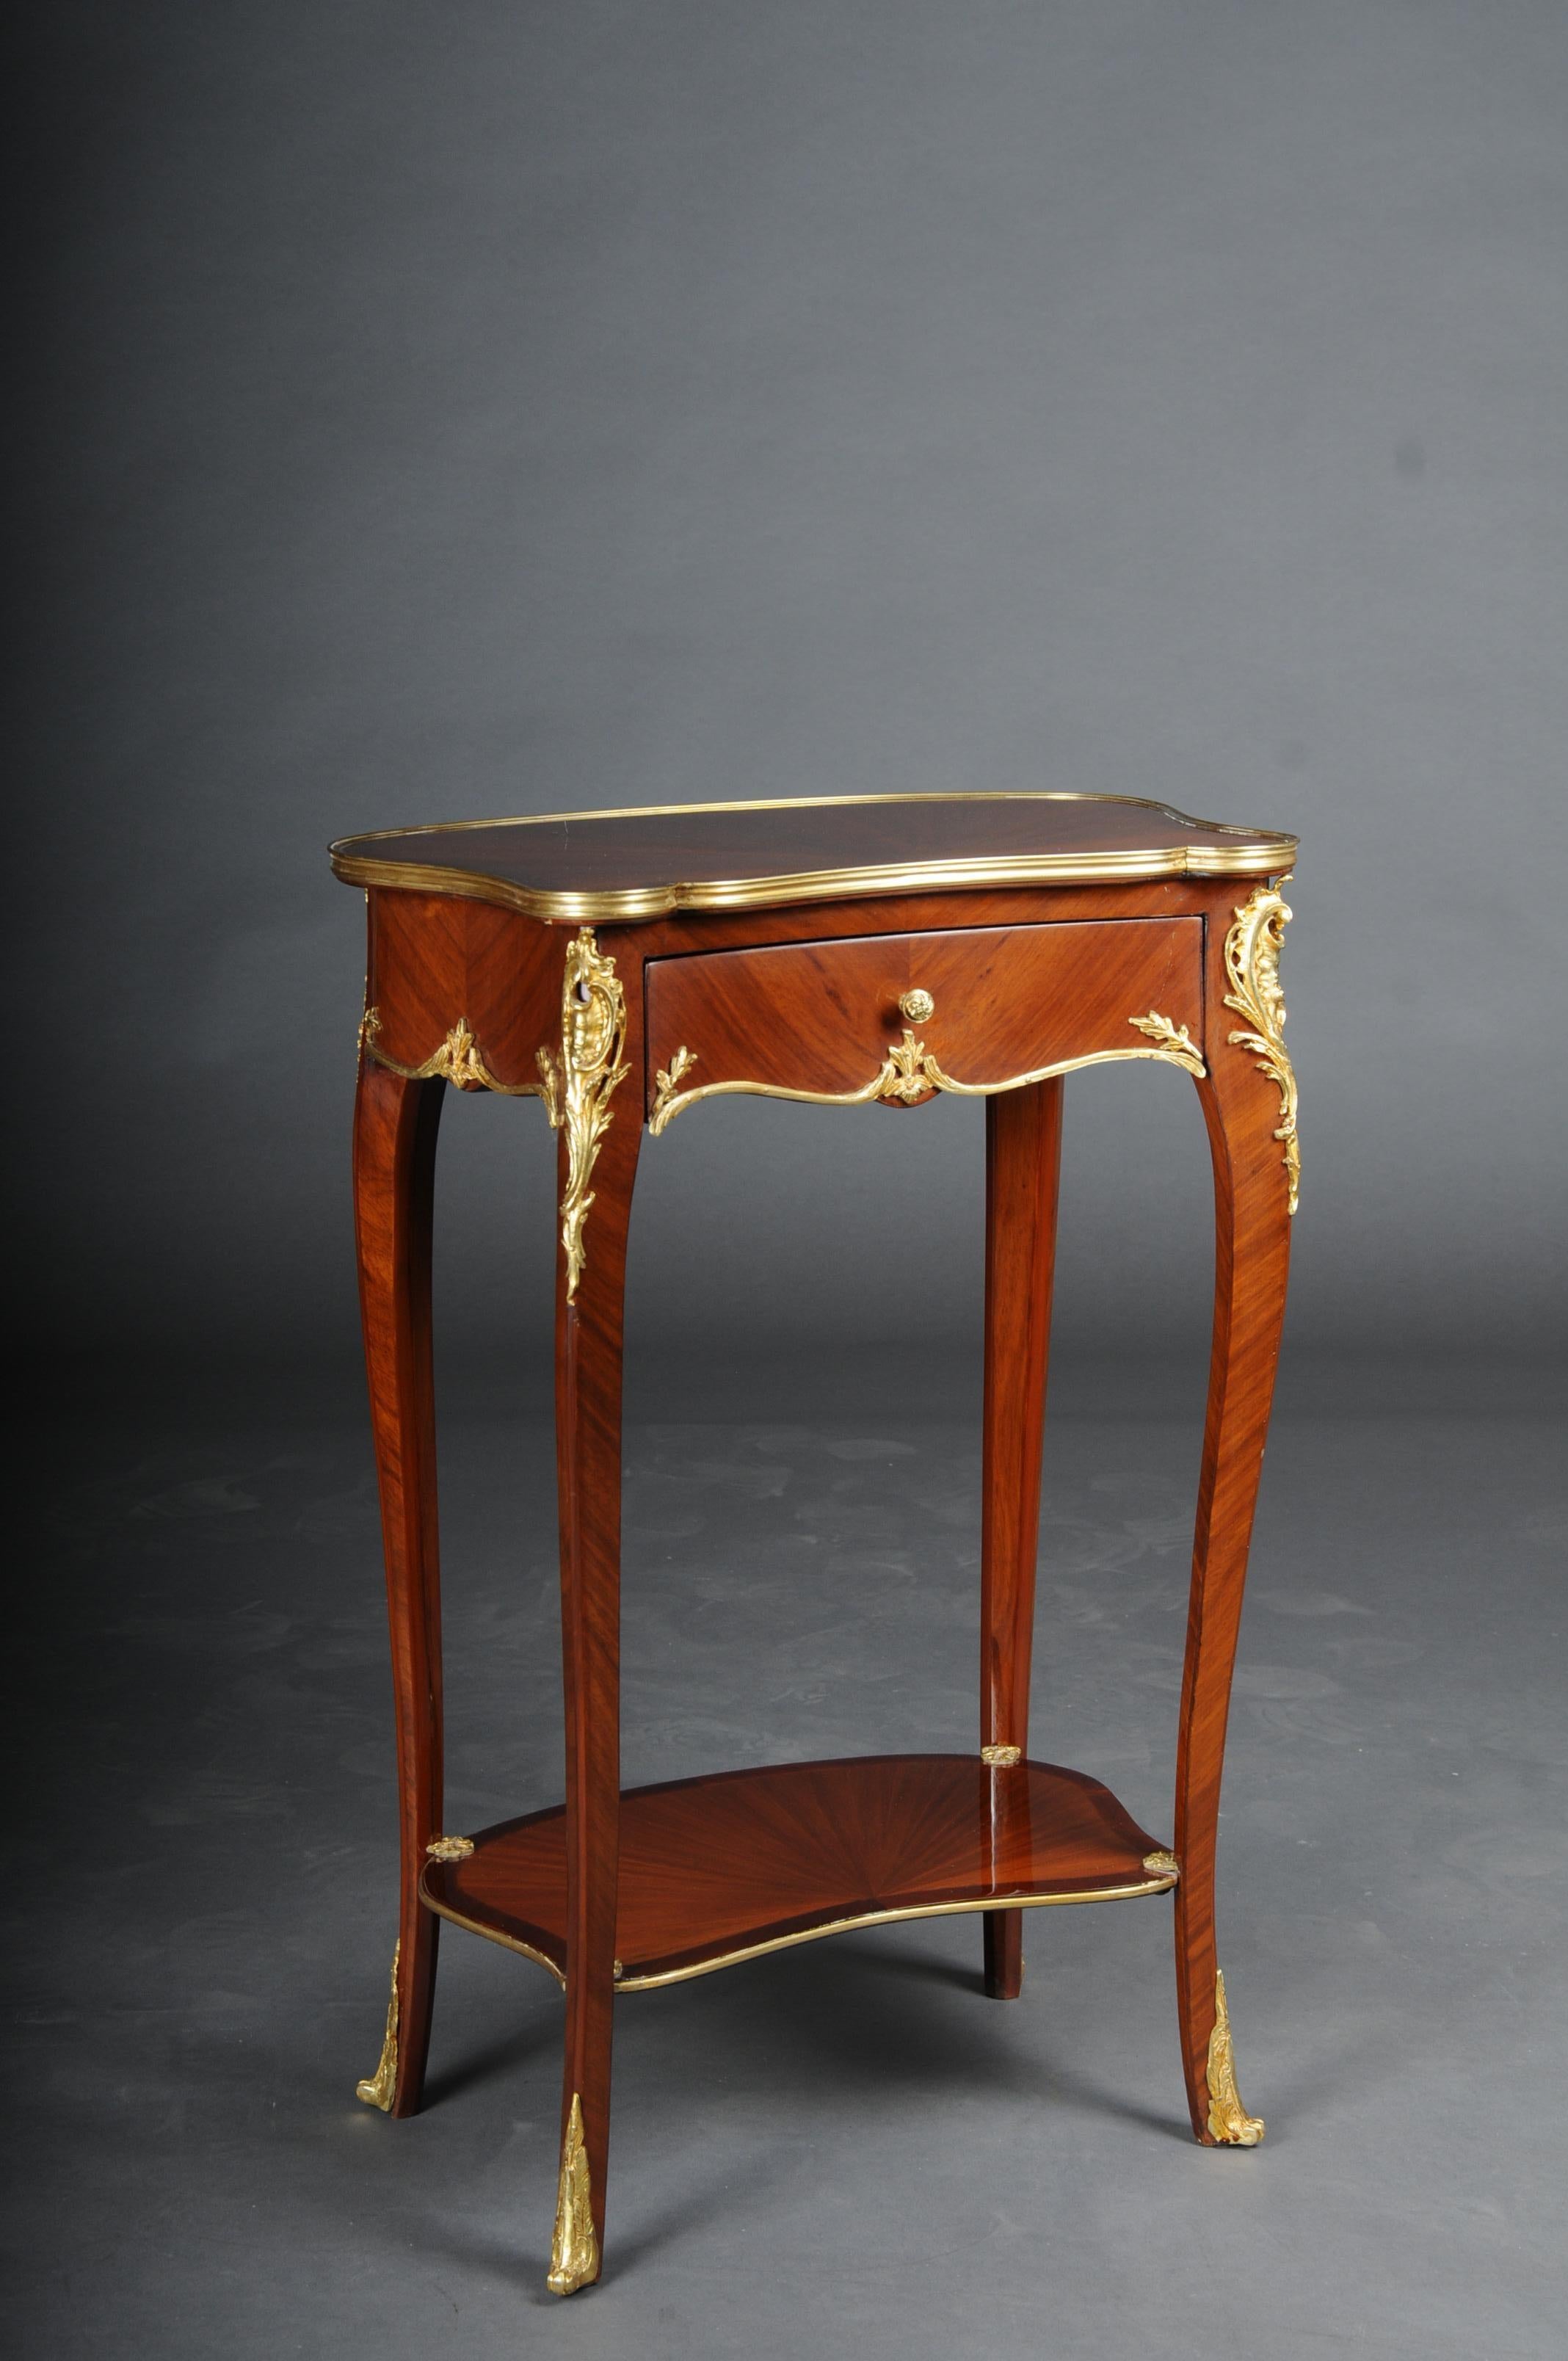 French side table/side table/hallway table, Louis XV

Side table made of solid beech, veneered with real wood, with a wonderful veneer pattern.

Robust two-stage structure in the appropriately curved body. Lavishly framed with gilded brass